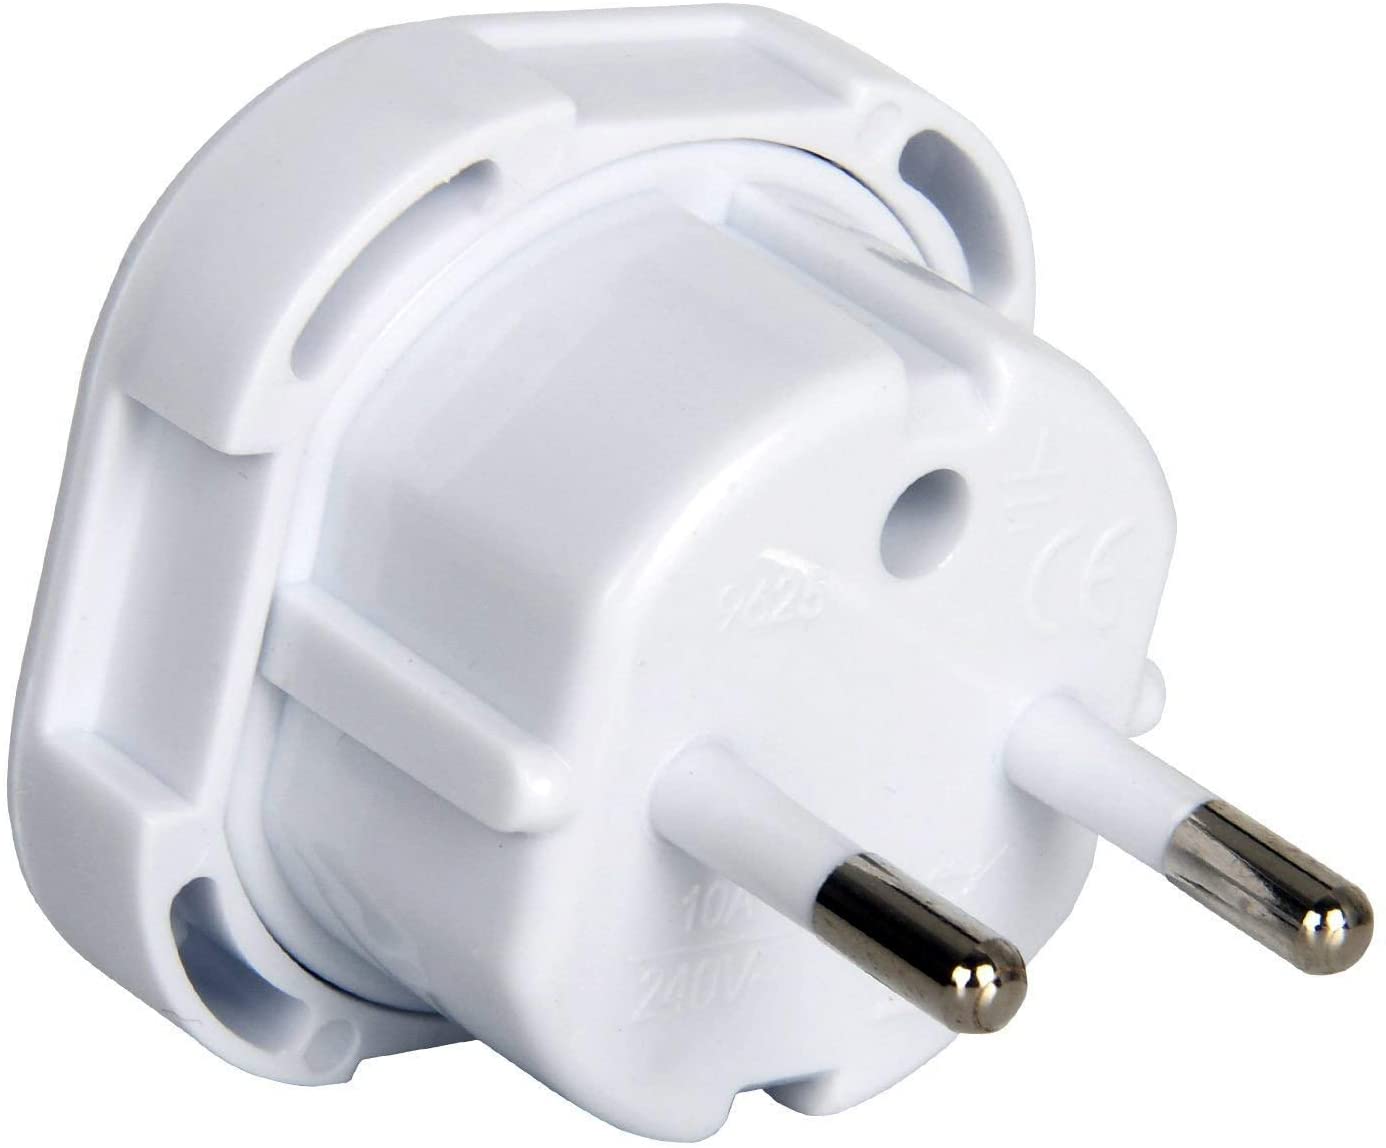 What Plug Adapter Do I Need For Portugal